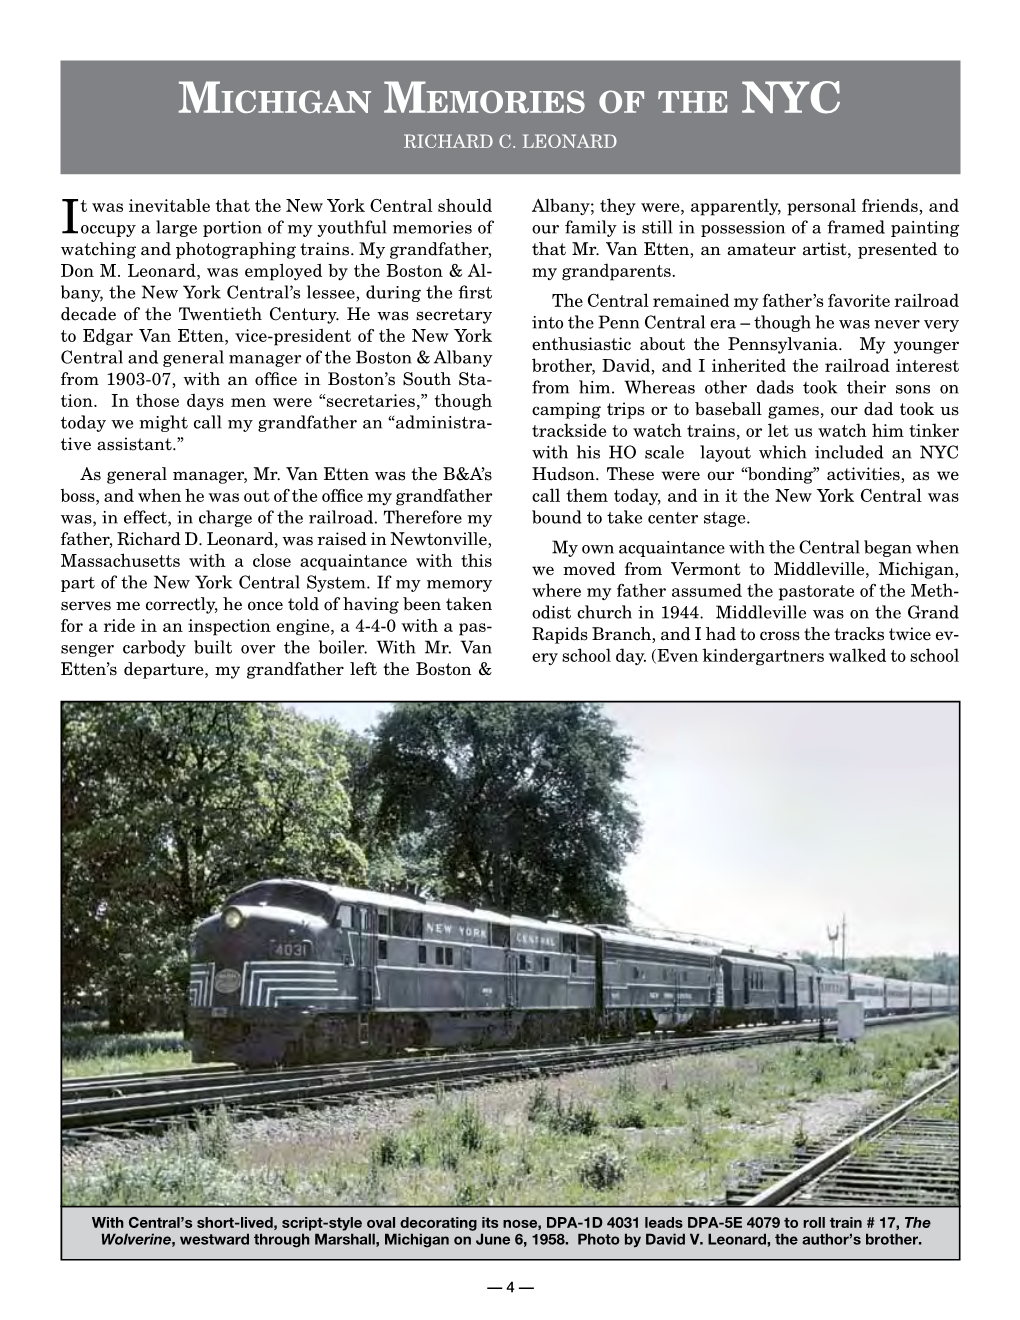 Michigan Memories of the New York Central